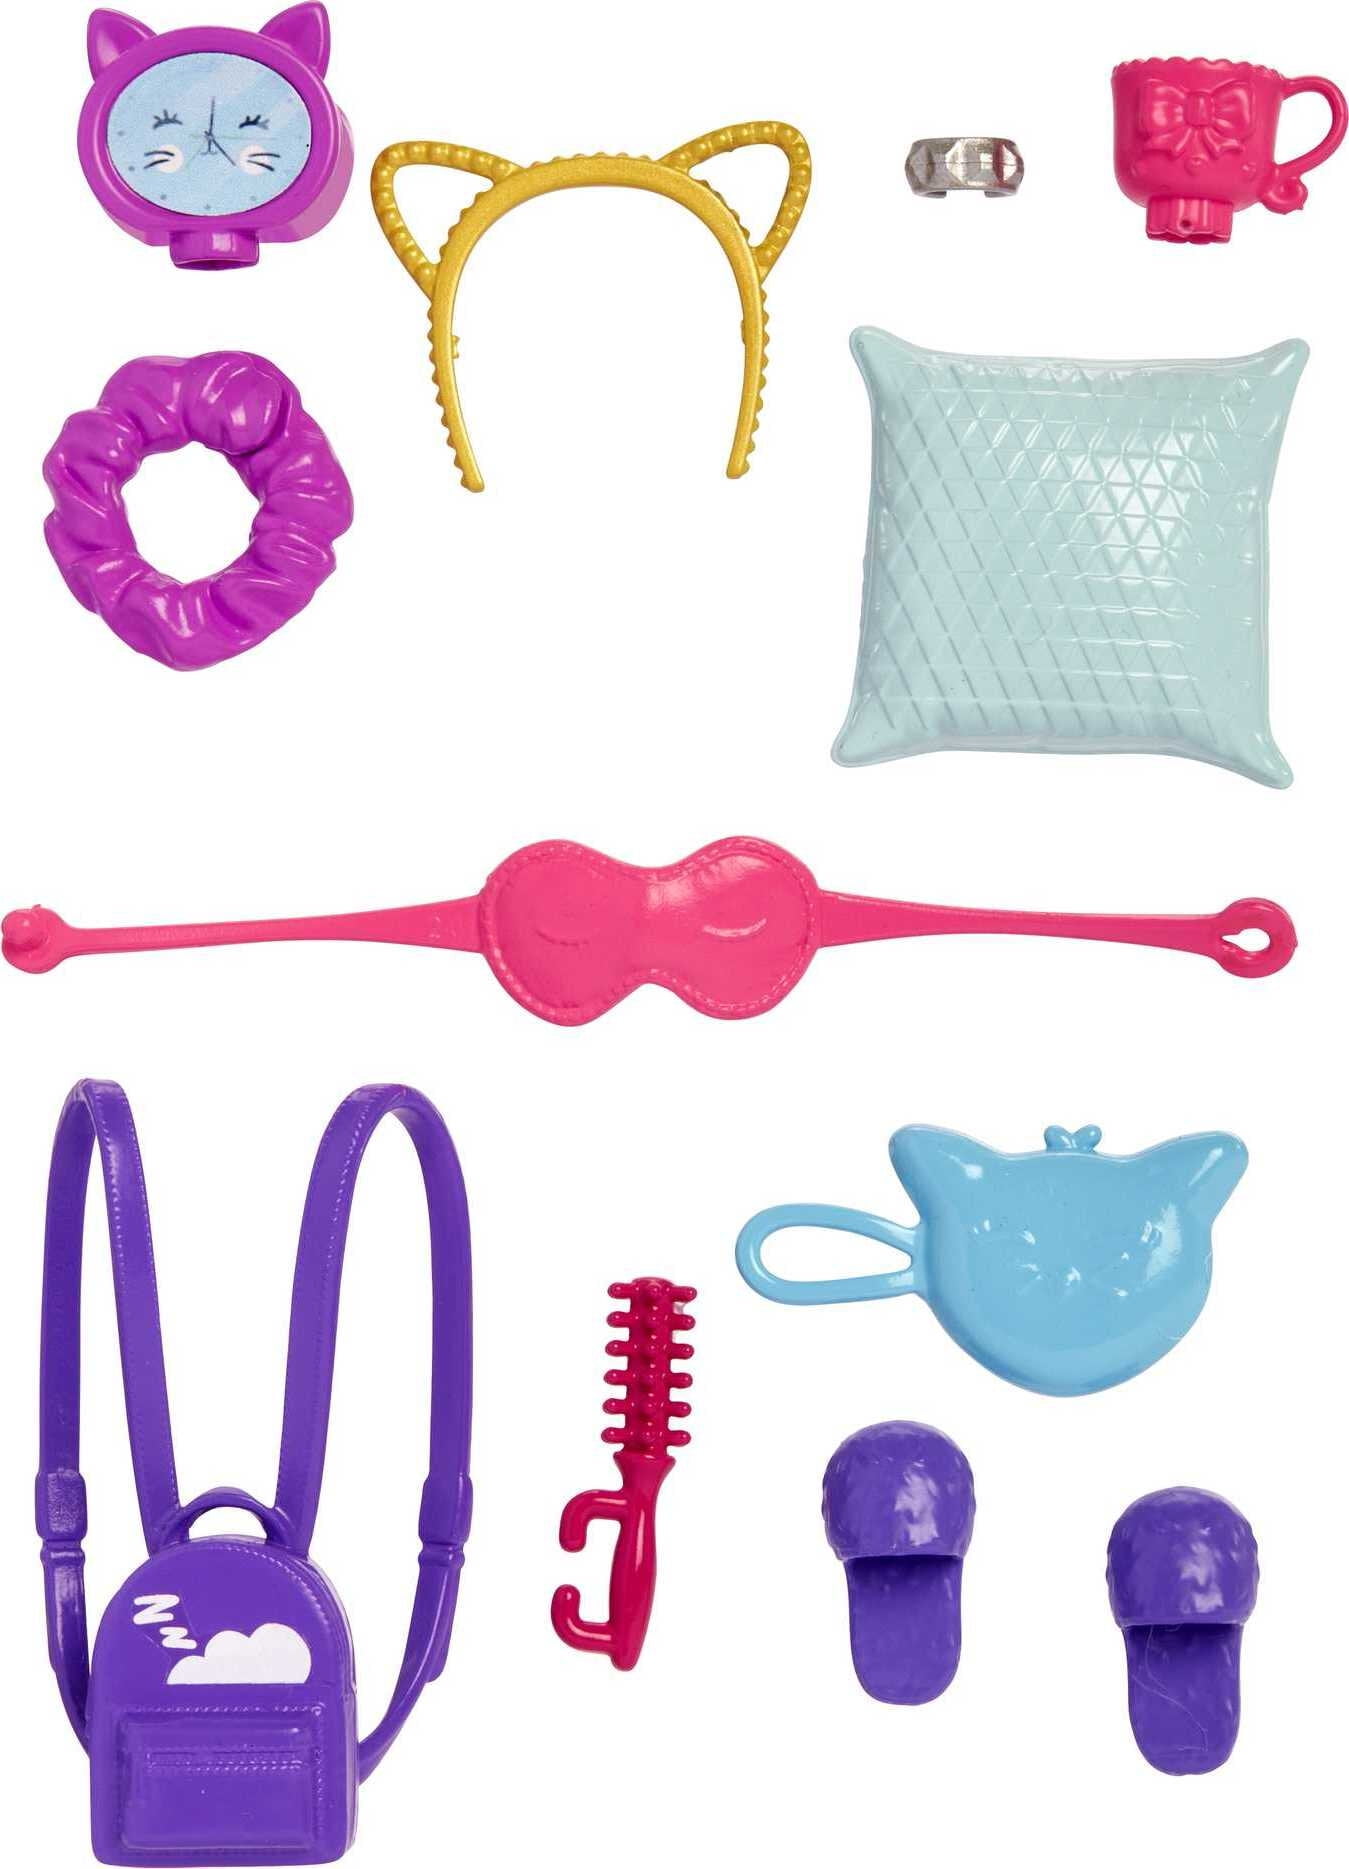 Barbie Accessory Pack, 11 Sleepover-Themed Storytelling Pieces for Slumber Party